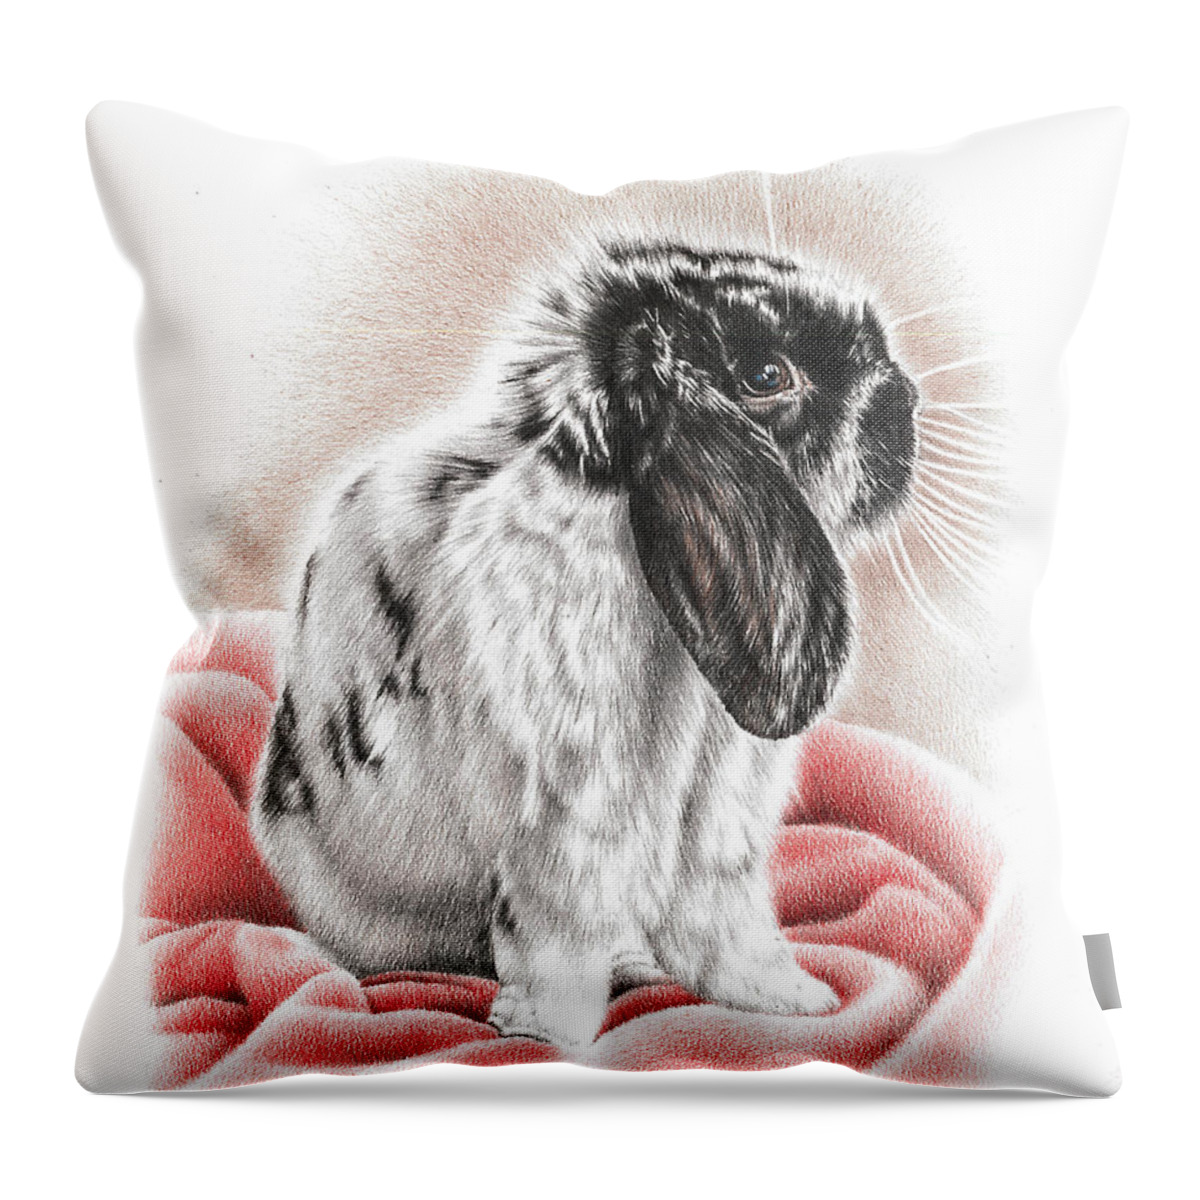 Bunny Throw Pillow featuring the drawing Black and White Bunny by Casey 'Remrov' Vormer